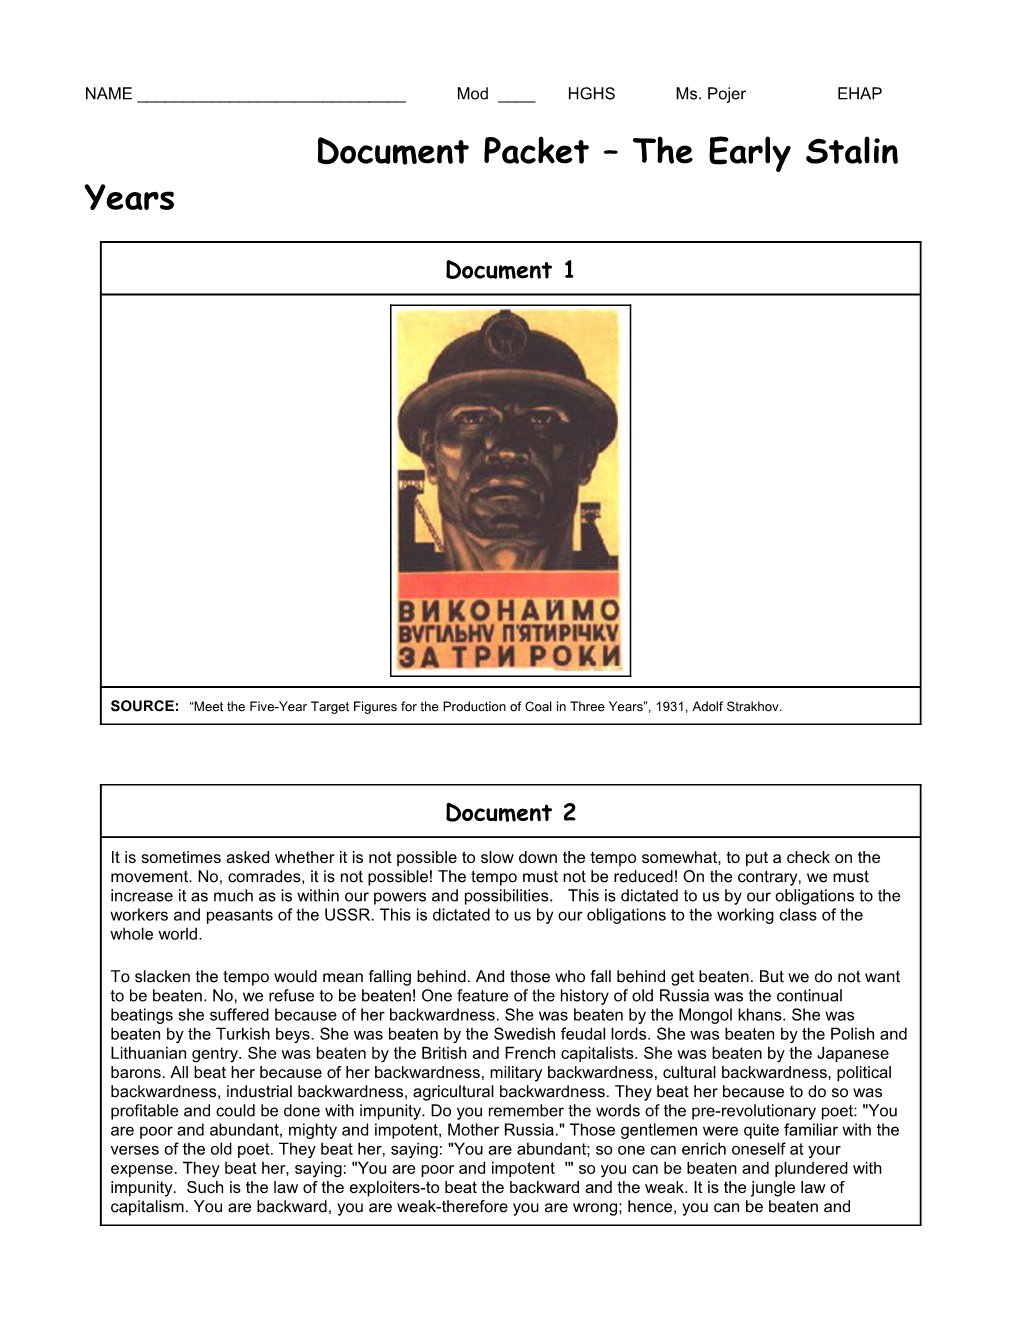 NAME ______Mod ____ HGHS Ms. Pojer EHAP Document Packet the Early Stalin Years